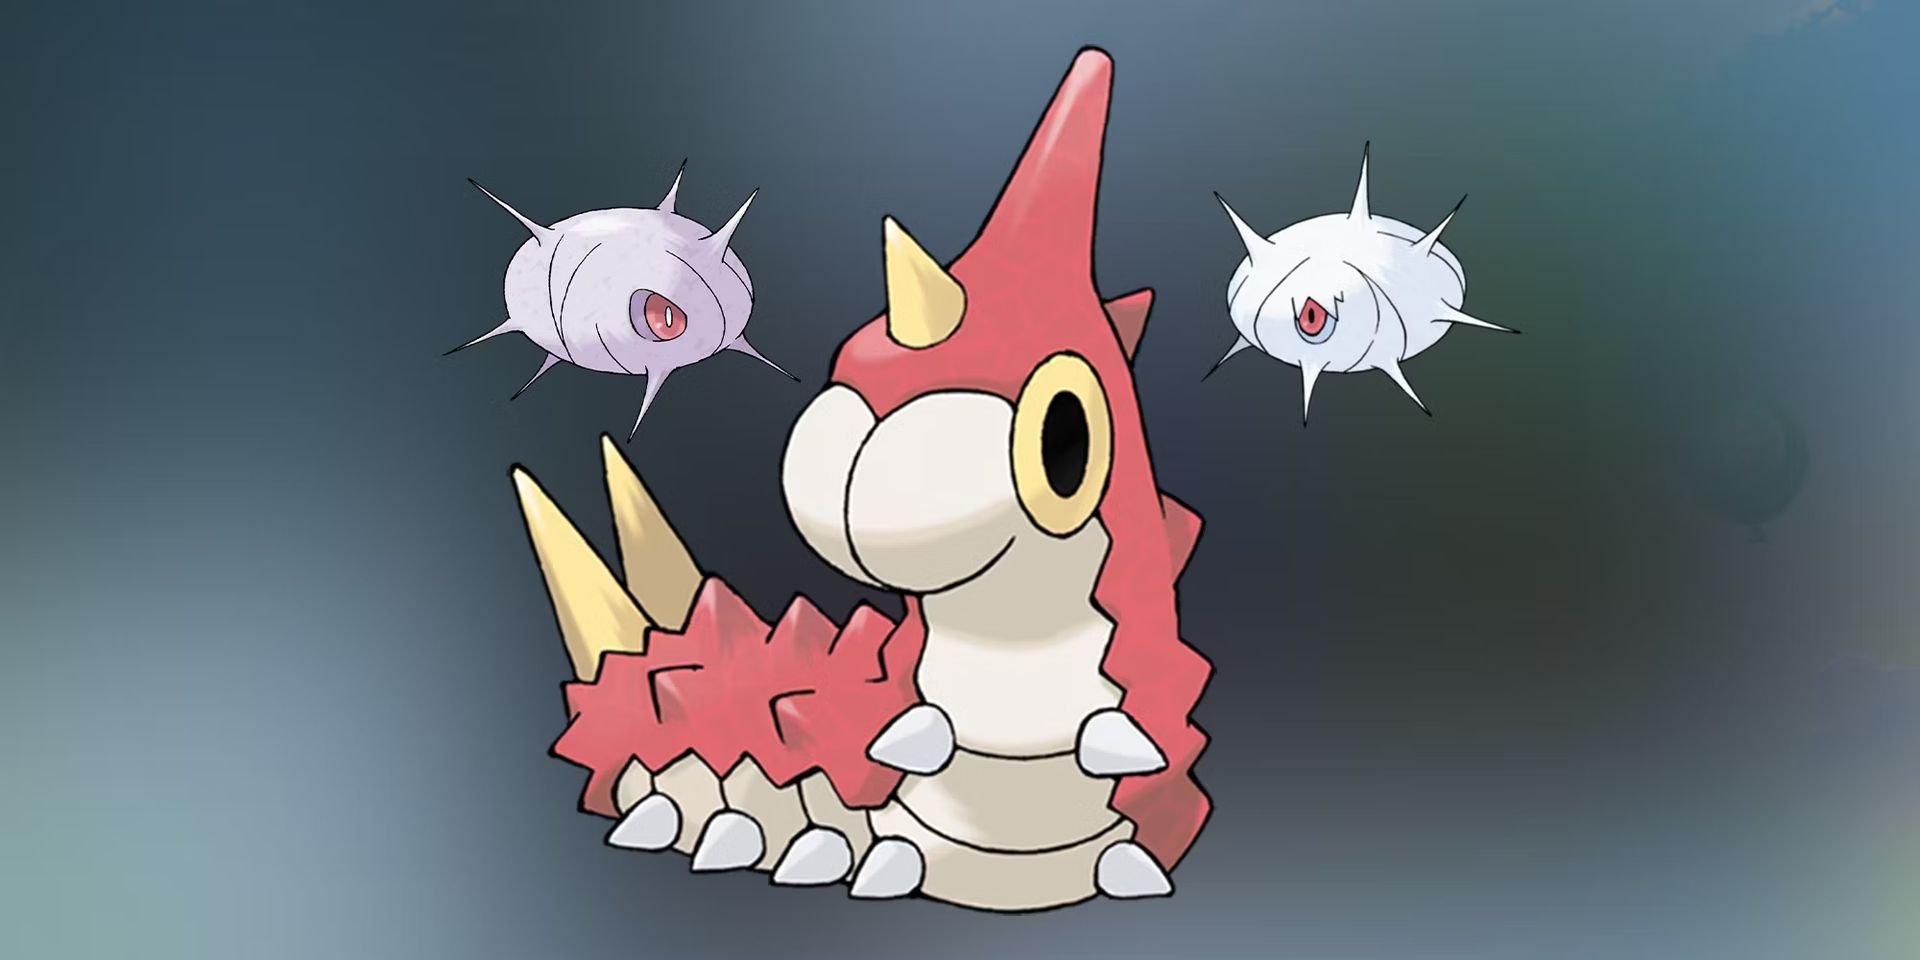 If you are wondering how to get Silcoon or Cascoon in Pokemon Go, you are not alone. We decided to create a guide on Wurmple evolution